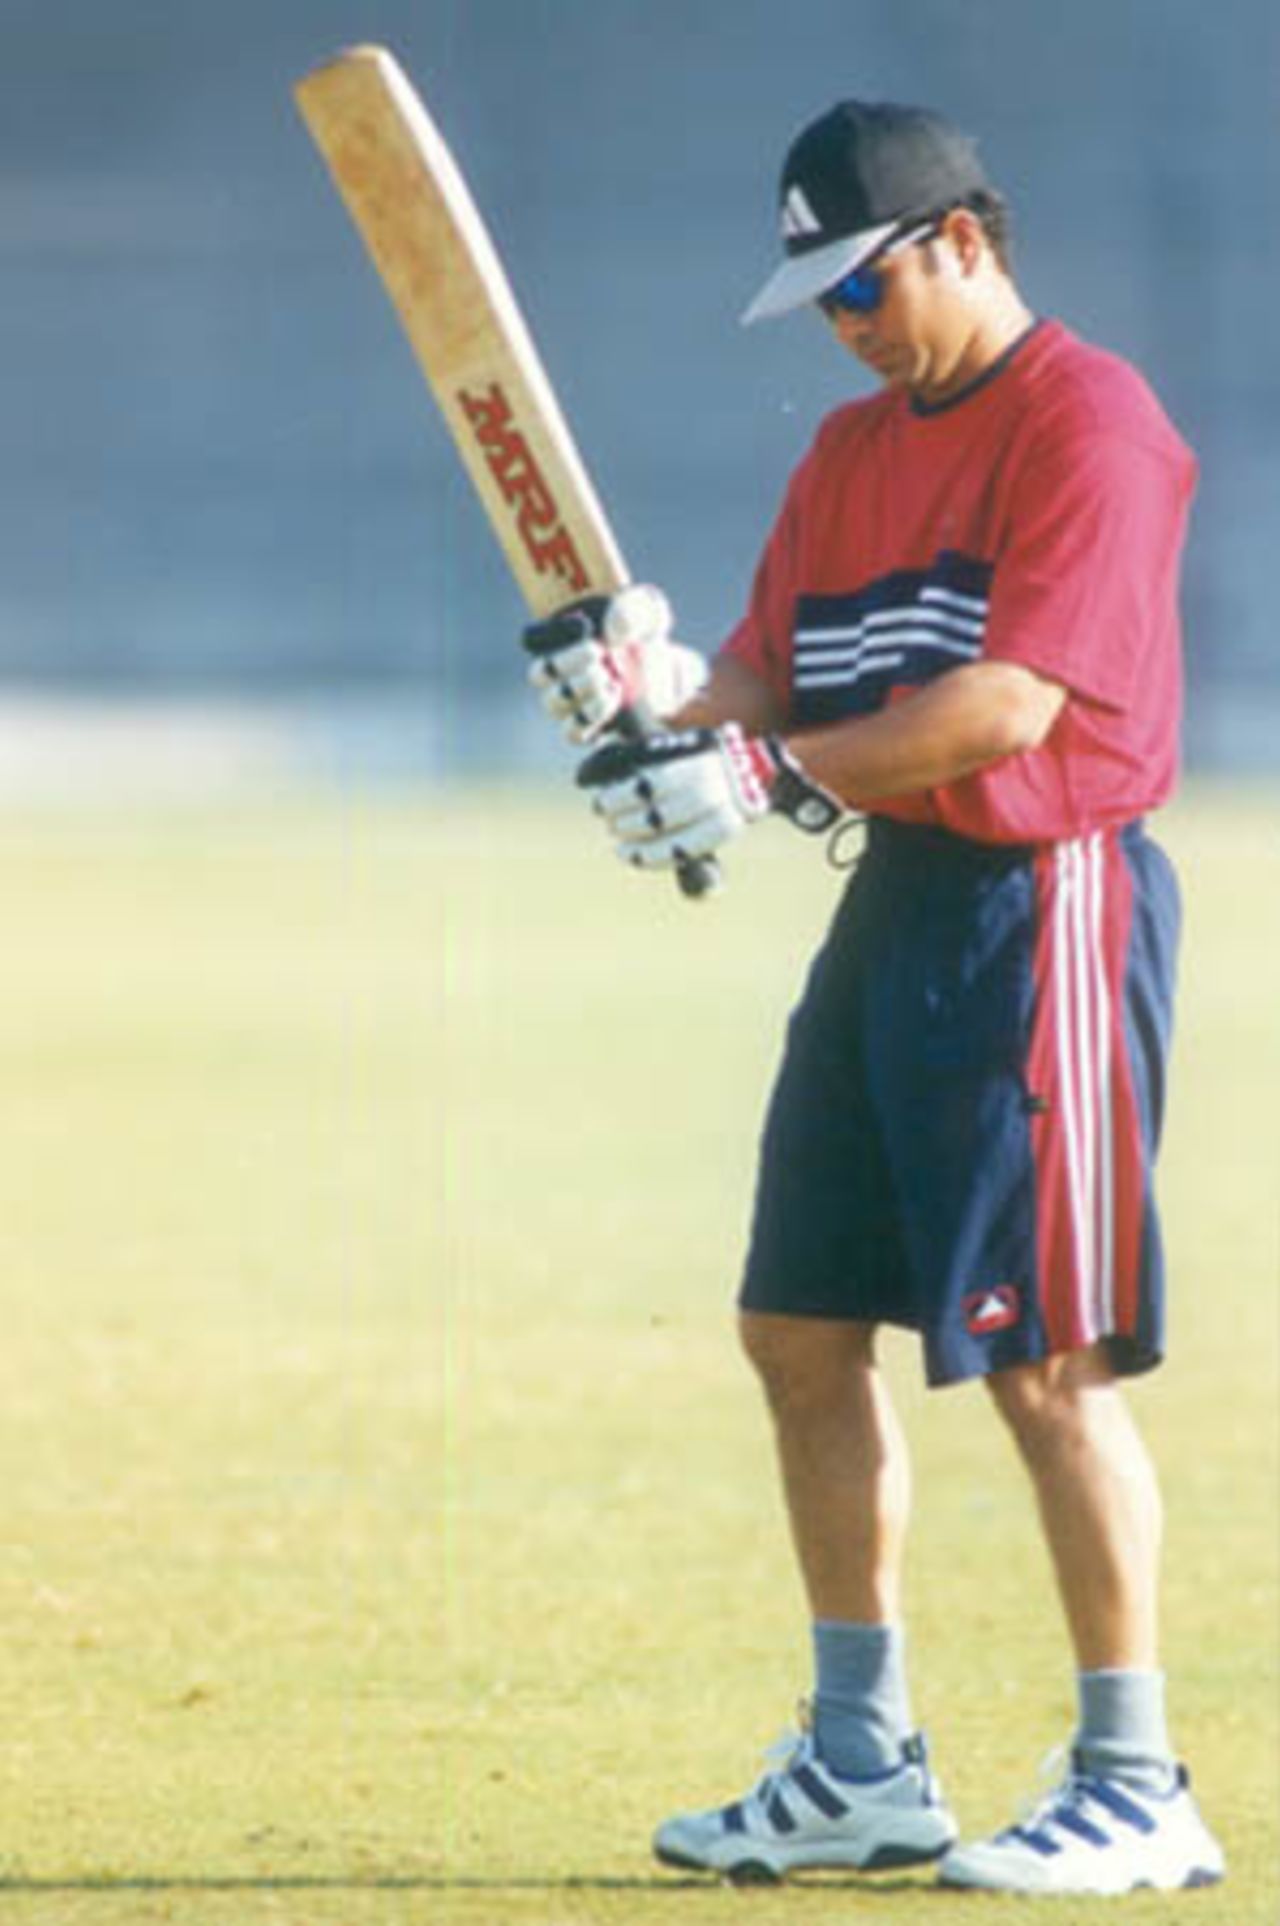 Sachin gearing up to bat at the nets before the start of the match against Pakistan